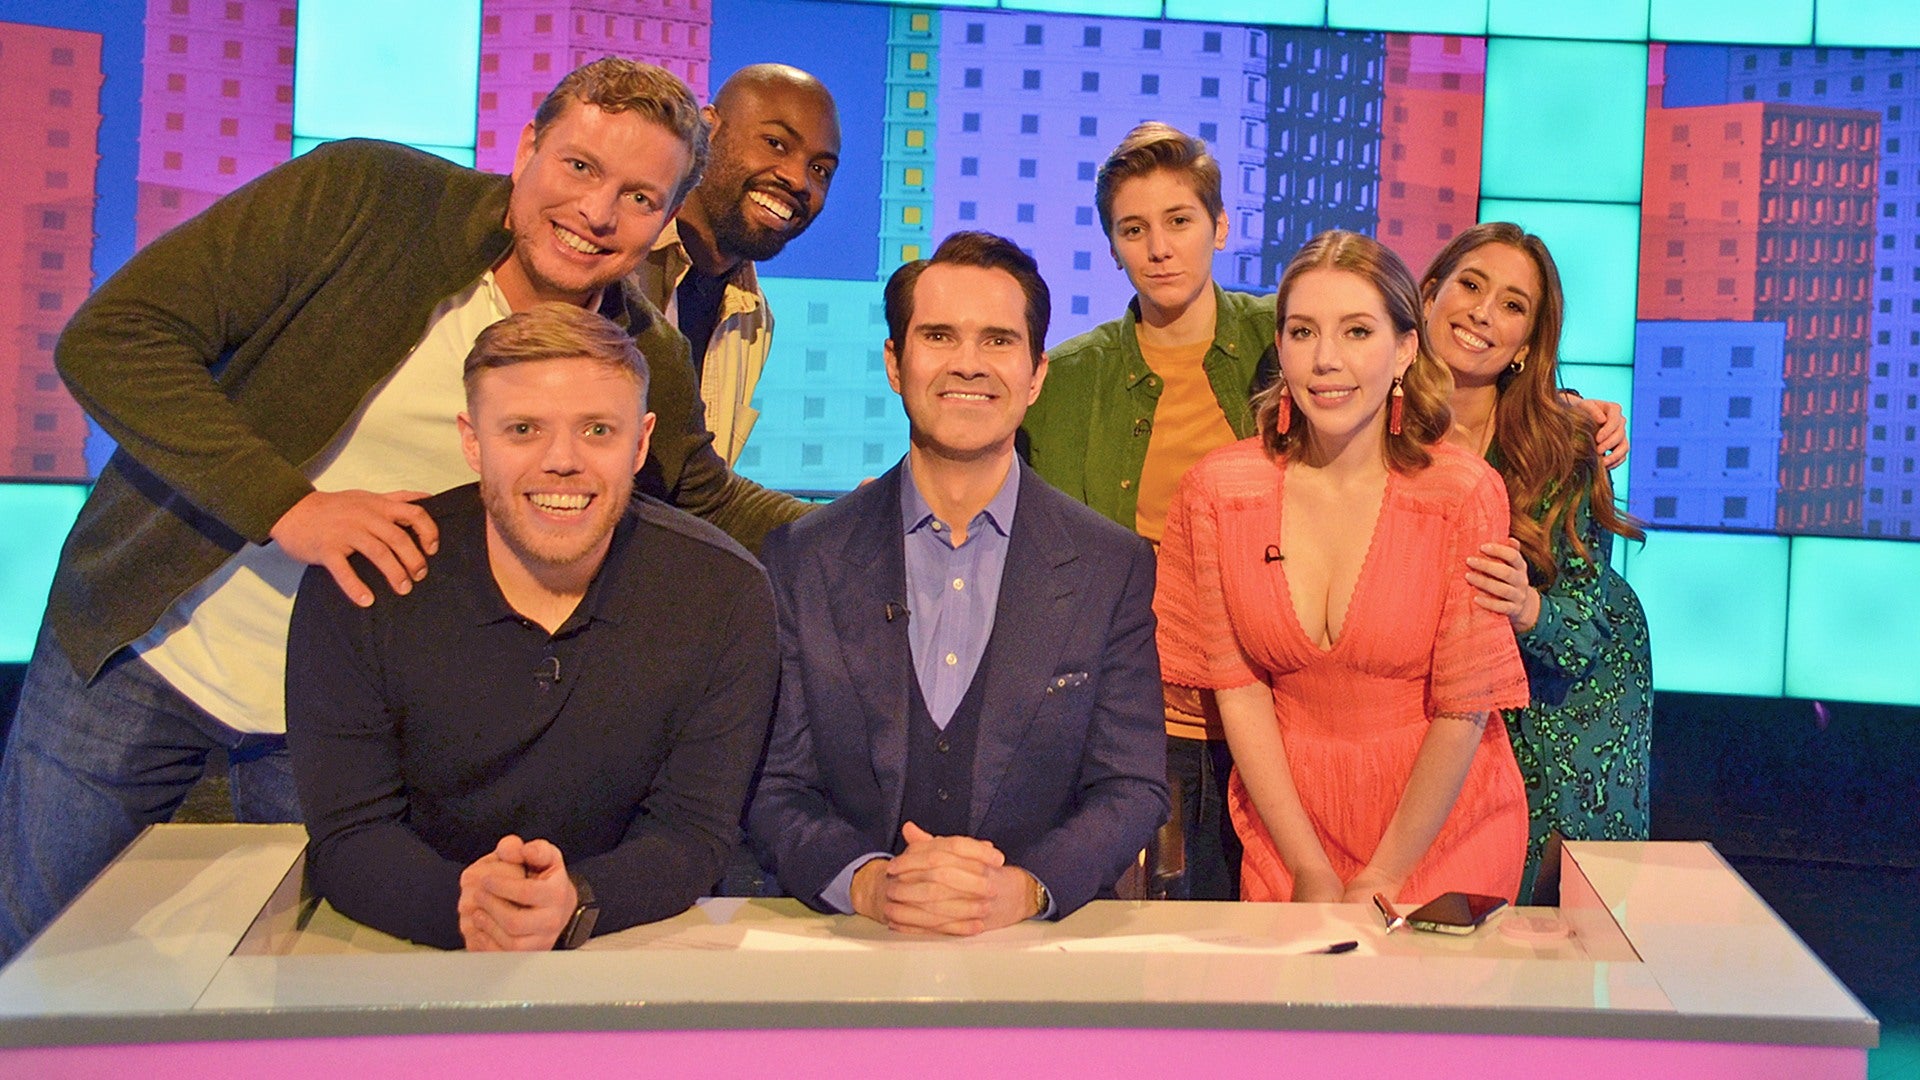 8 out of 10 cats Series 22 Episode 7 Katherine Ryan